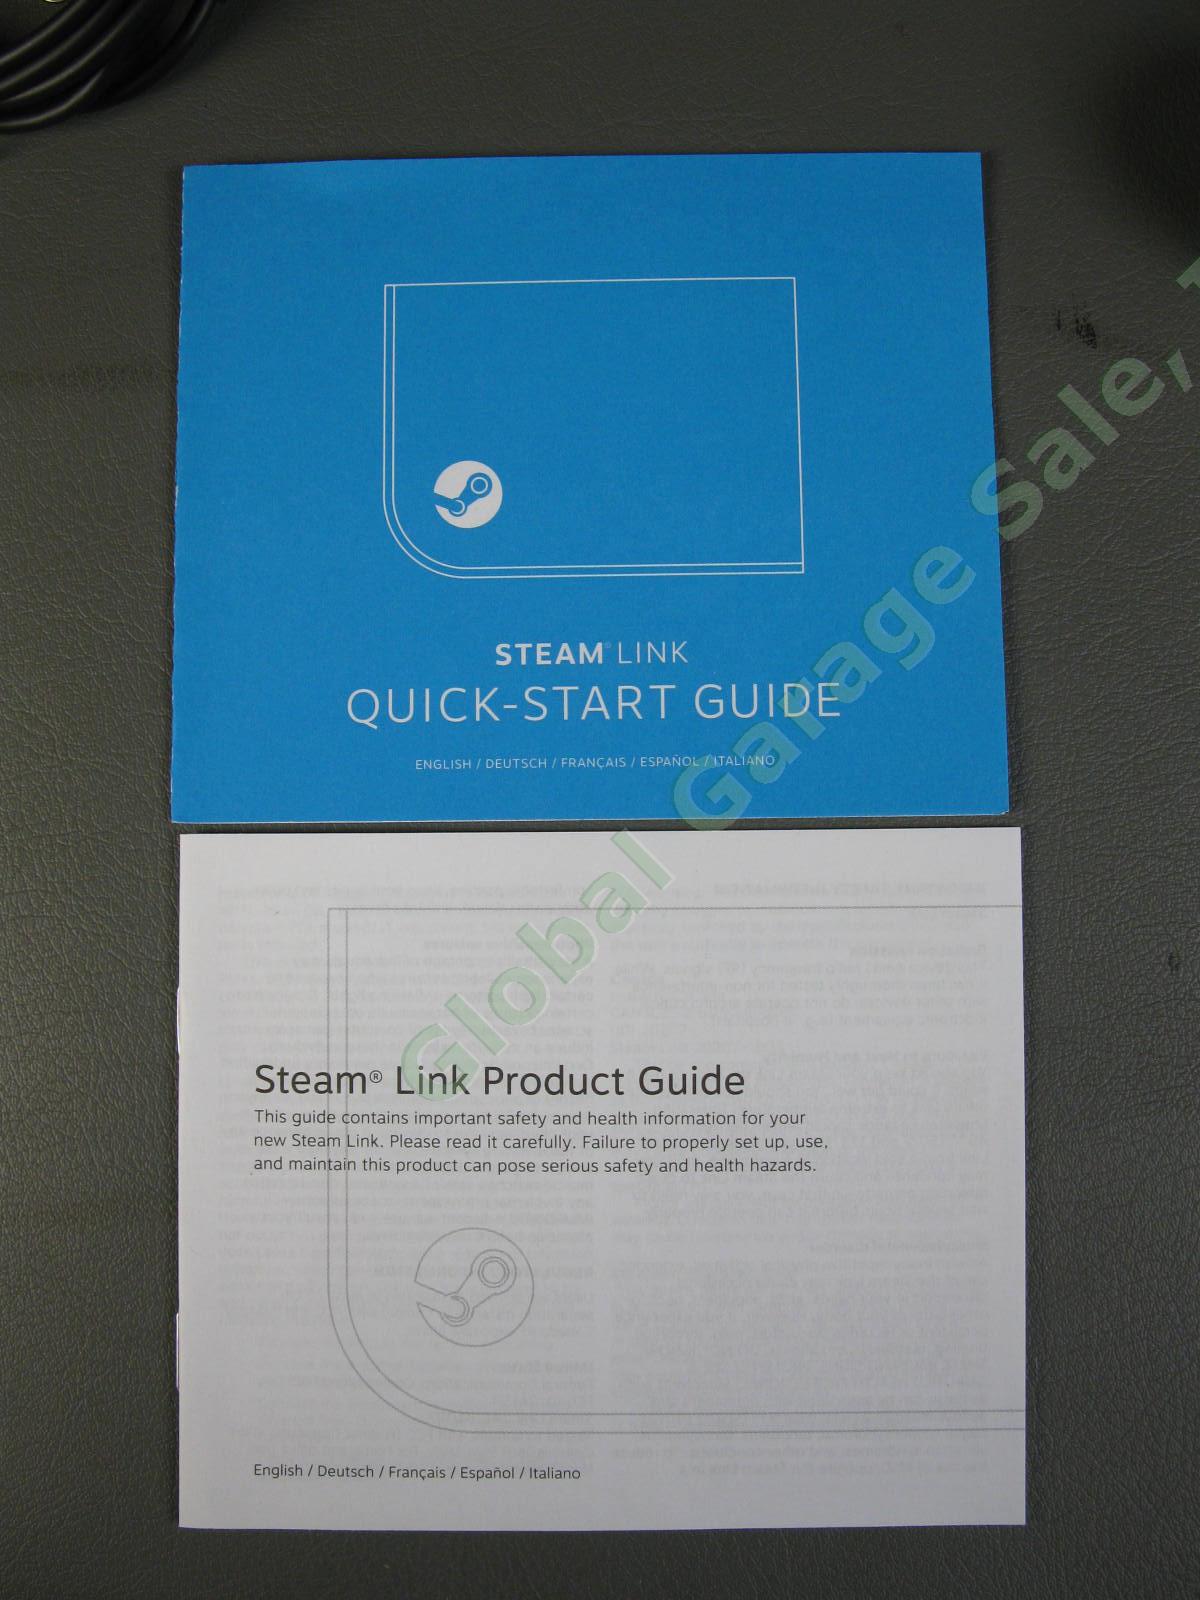 Valve Steam Link Model 1003 HDMI USB Power Adapter User Guide Perfect Condition 3